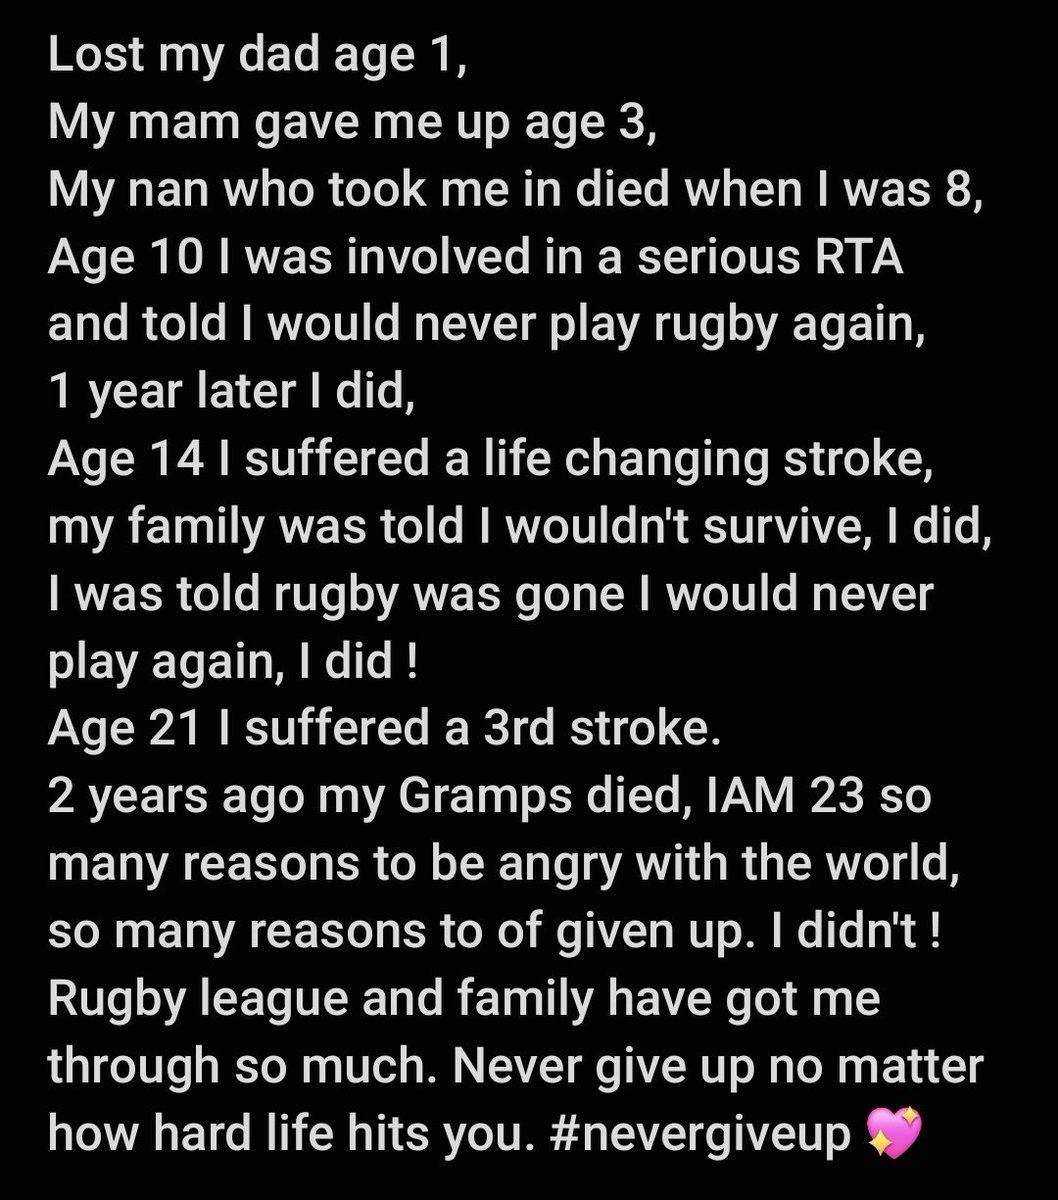 So many reasons to give up, so many reasons to be angry but I have never said why me ! #staypositive #braininjury #stroke #nevergiveup #bethatlight #tuesdaythoughts @TheRFL @RLCares